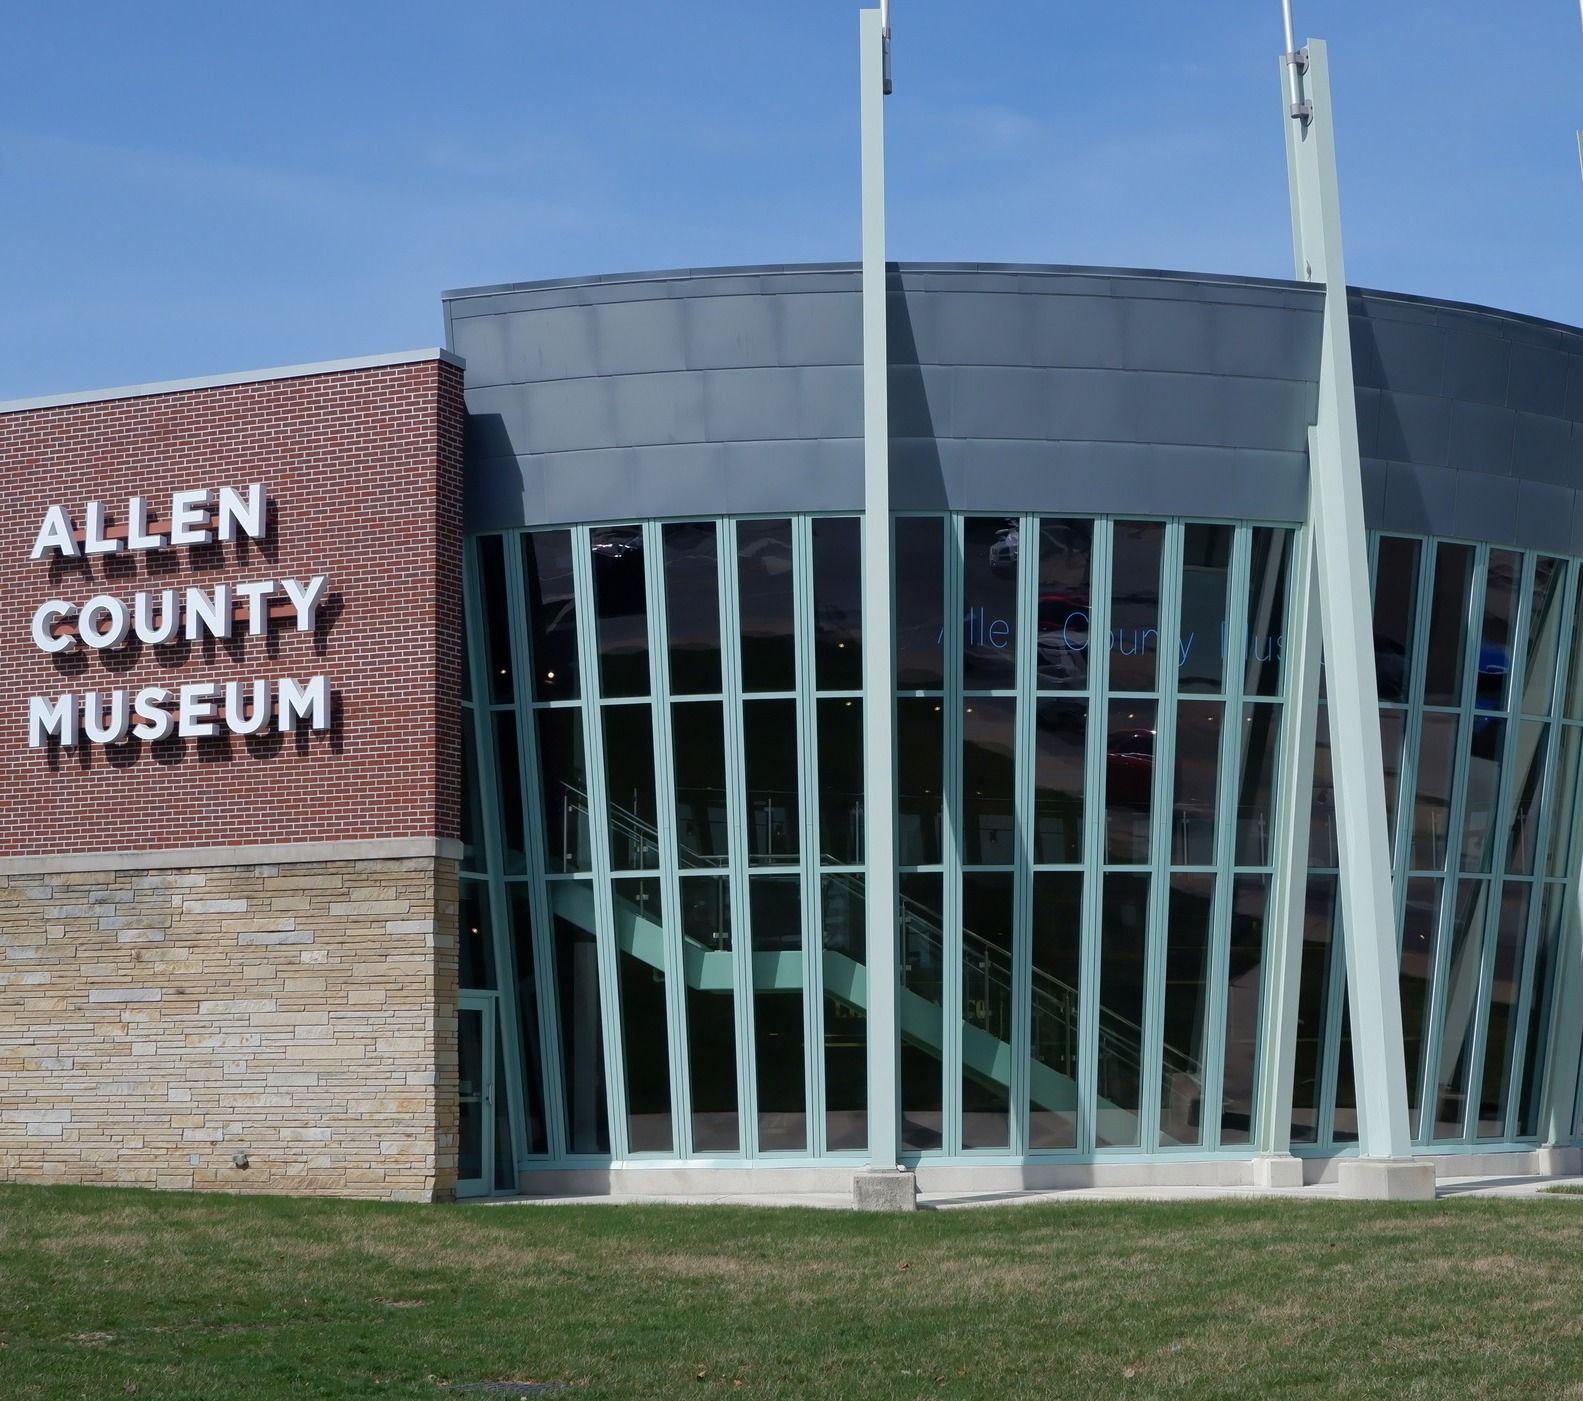 Allen County Museum front with sign and glass window showing antique train.